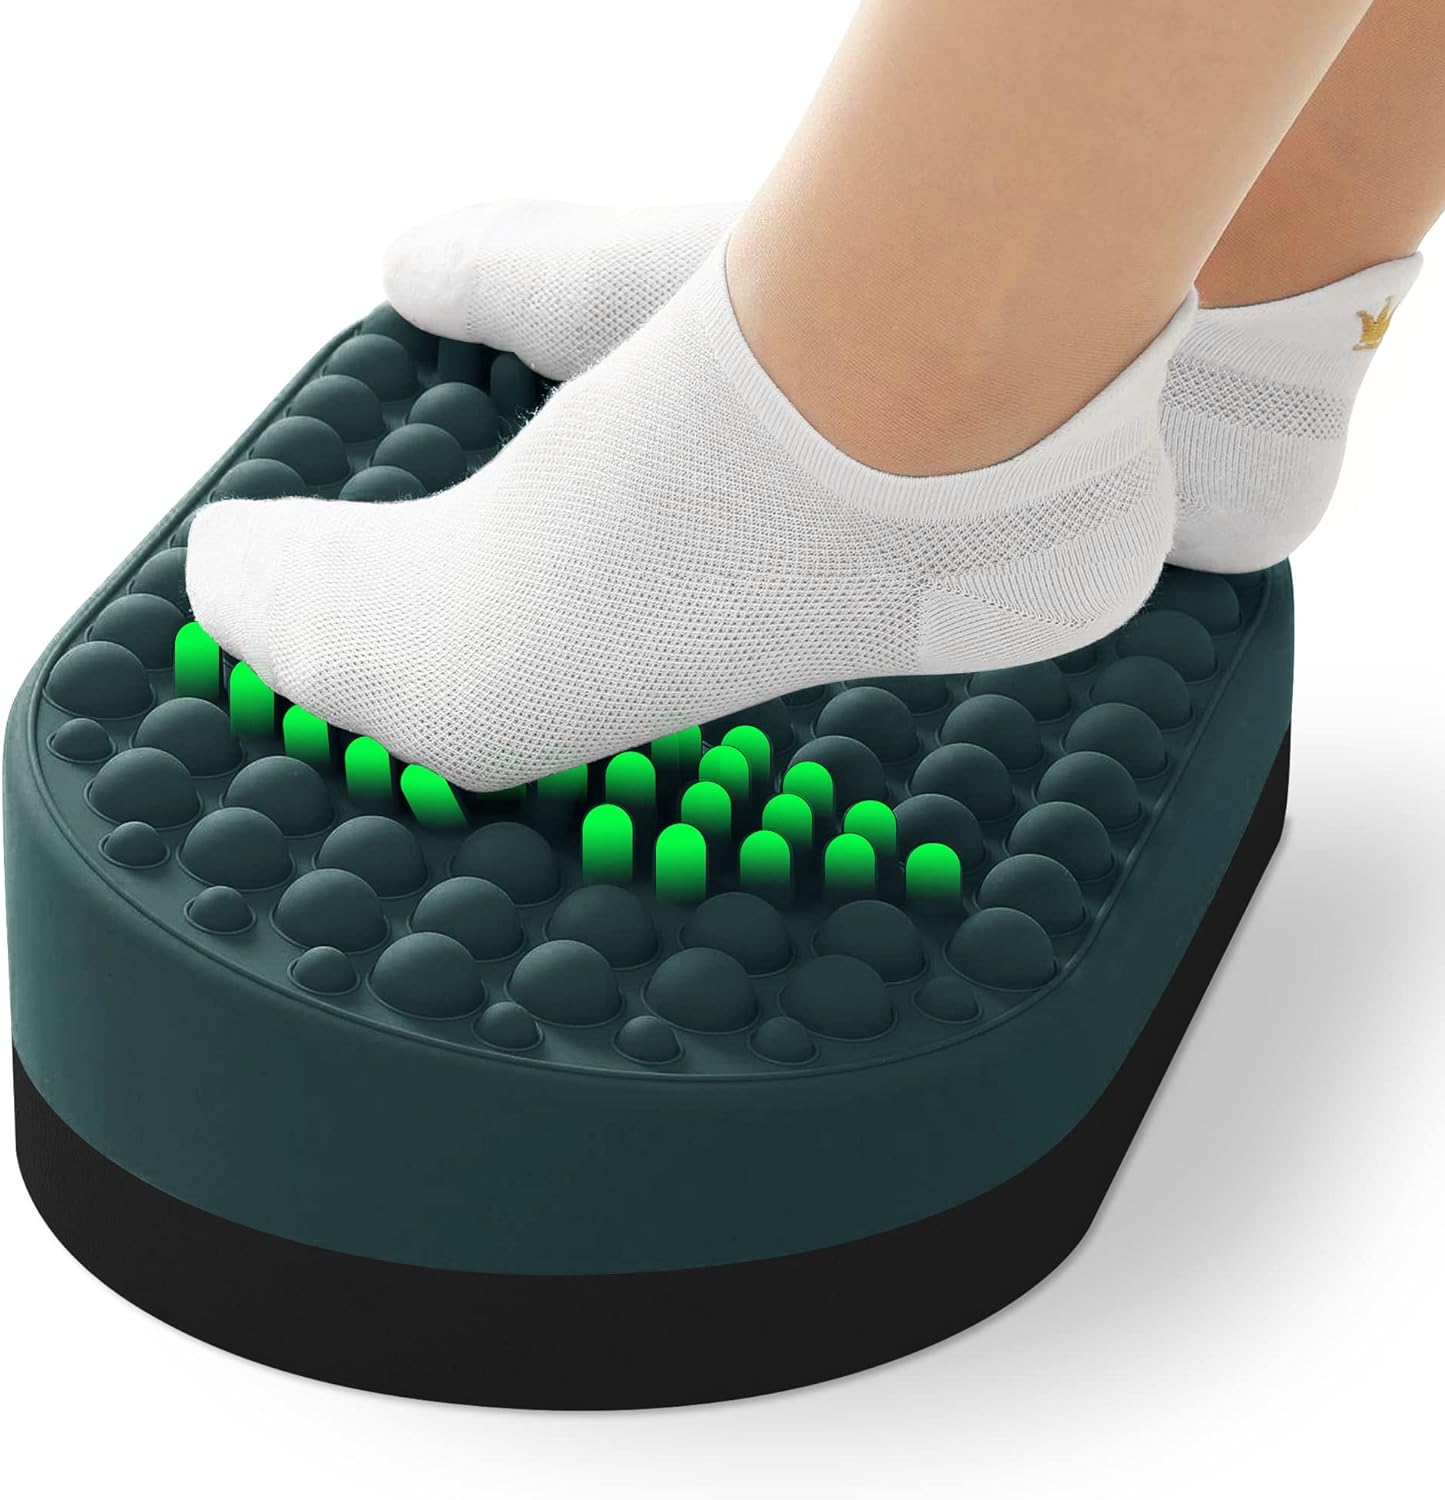 I love this foot rest. I have not had sore feet and legs since getting this. The textured bubbles feel good on my feet and give my fidgety feet something to do when I get tense.